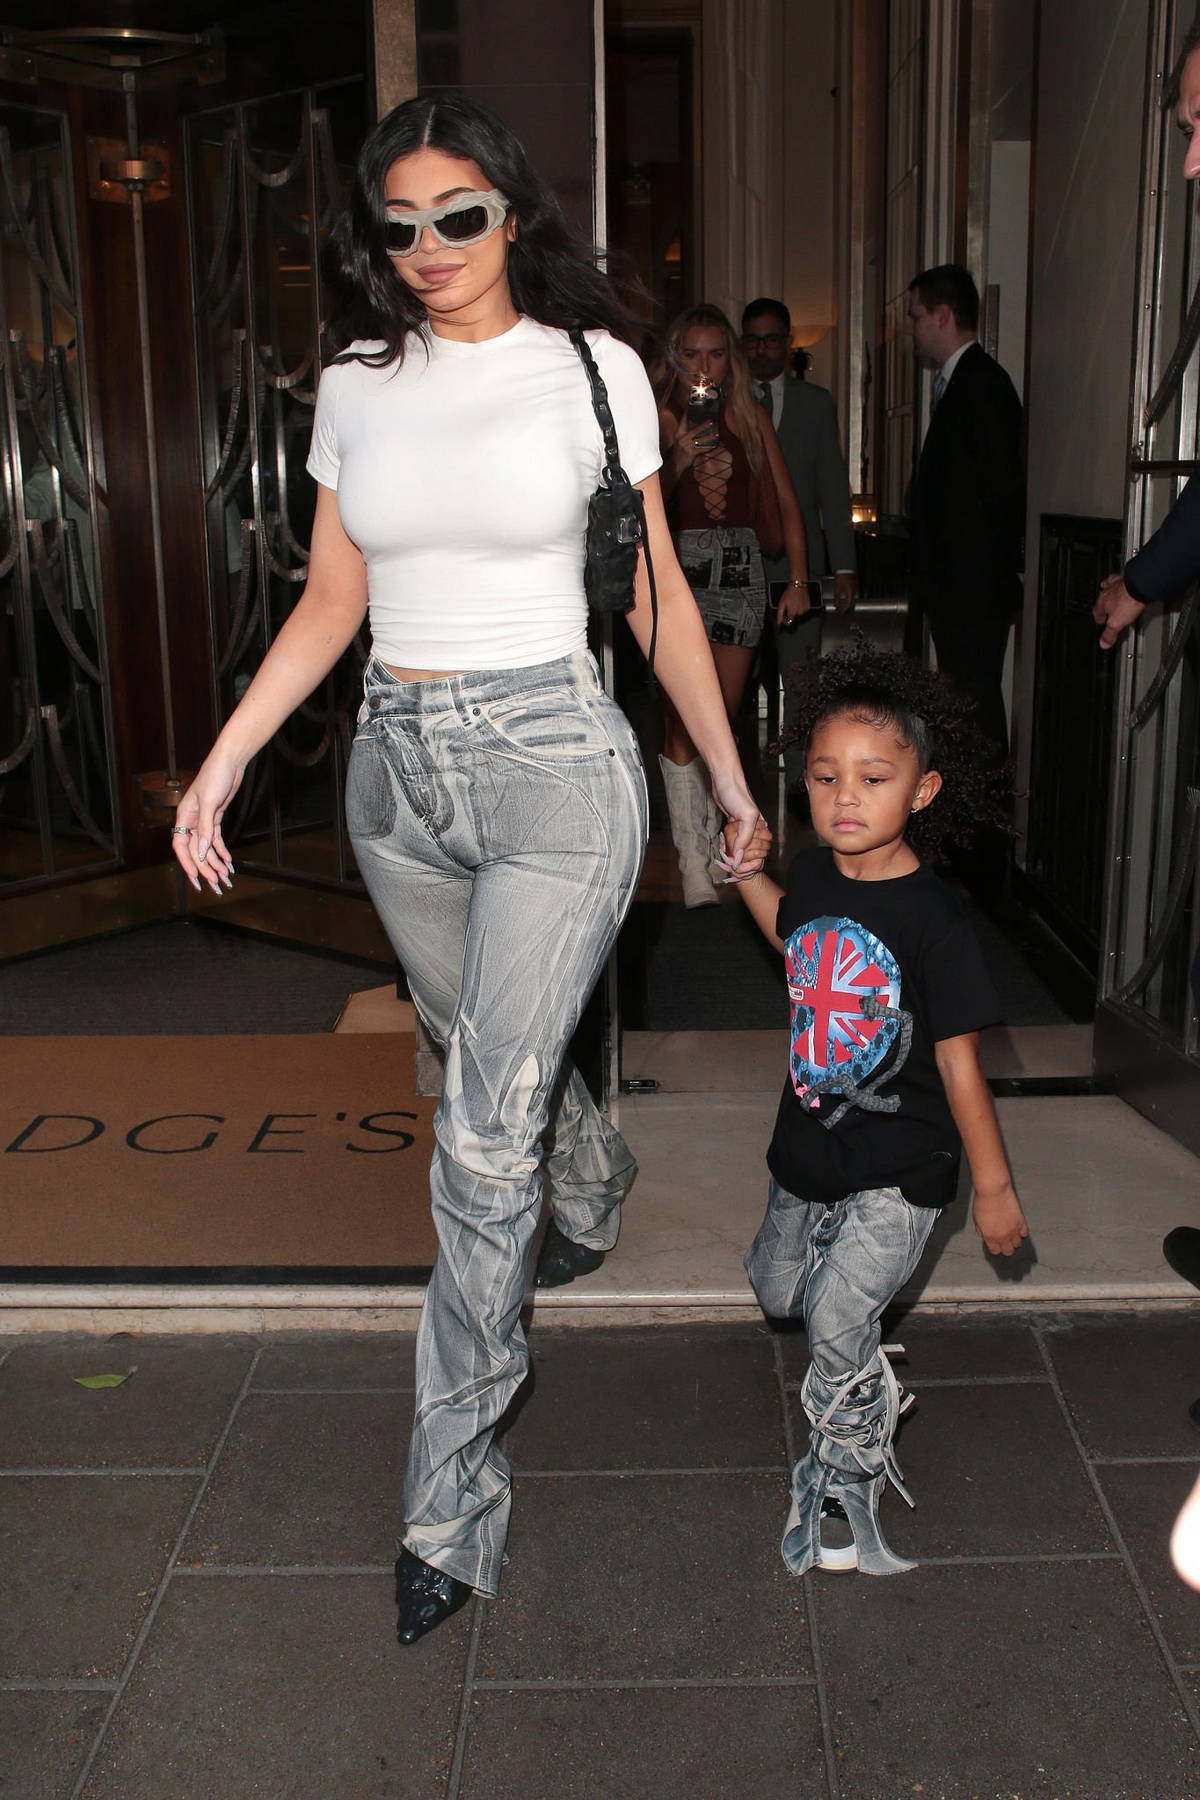 Kylie Jenner rocks a white skintight top and grey jeans while heading out  with her daughter